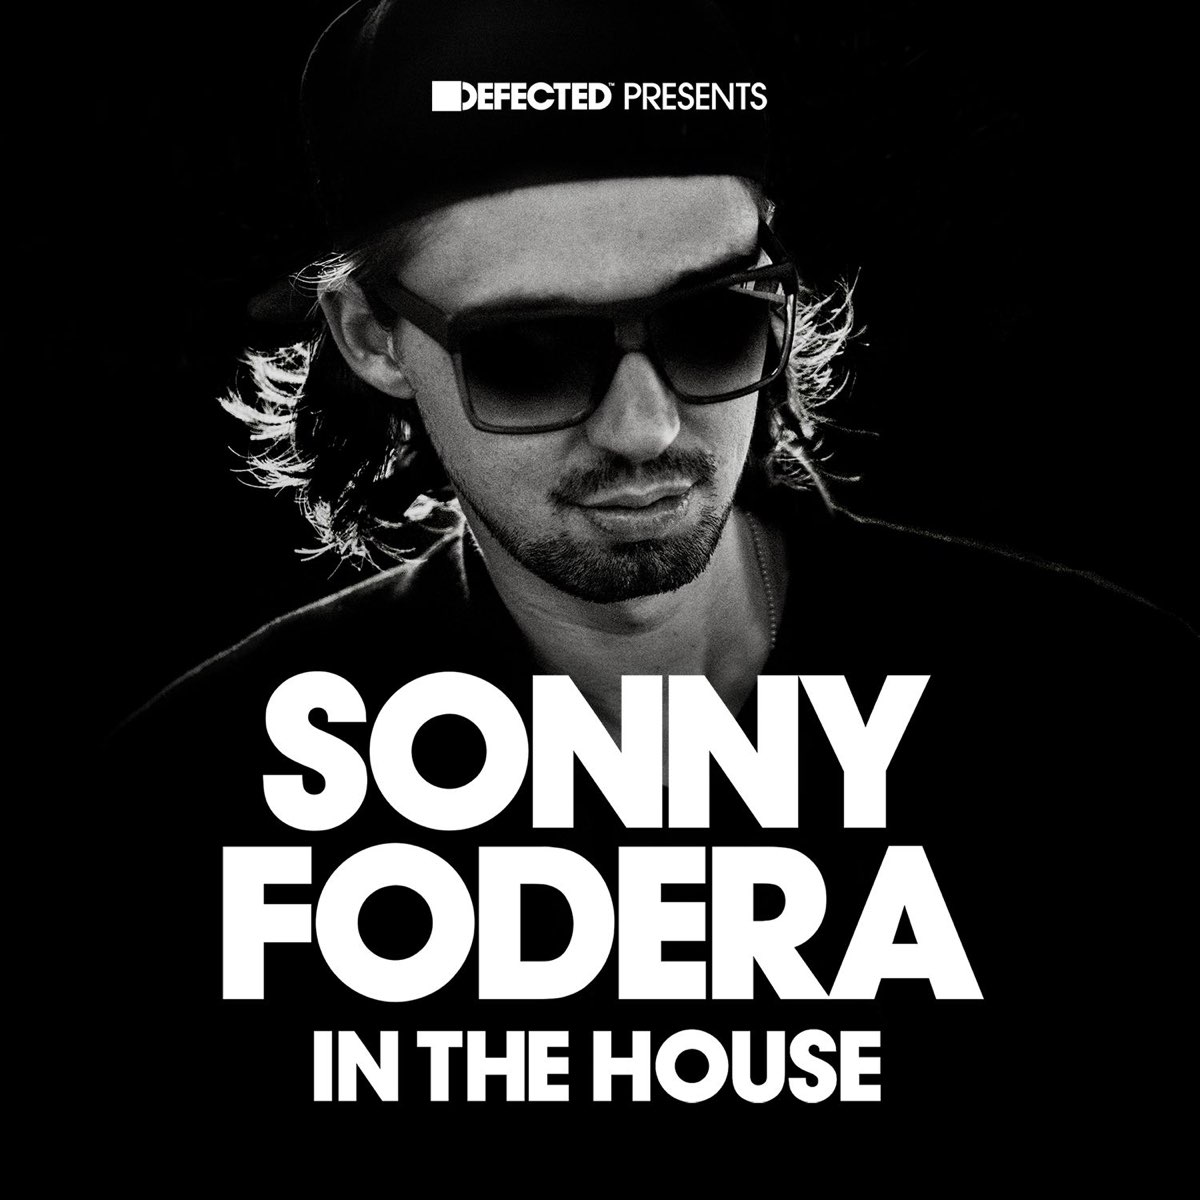 ‎Defected Presents Sonny Fodera in the House by Sonny Fodera on Apple Music